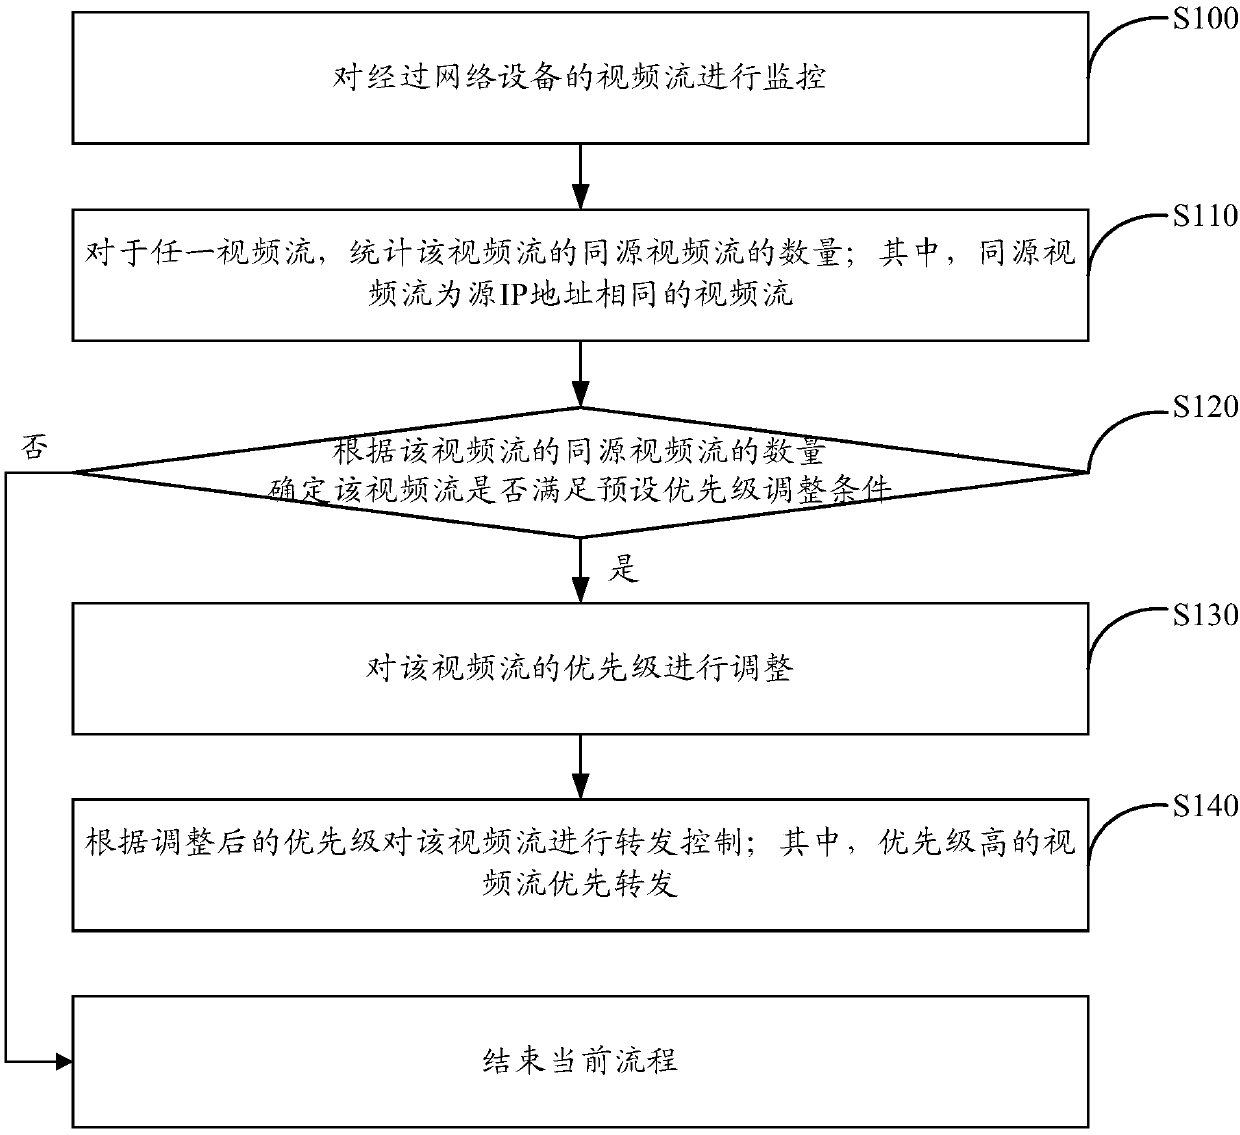 Video stream forwarding control method and device, electronic equipment and readable storage medium